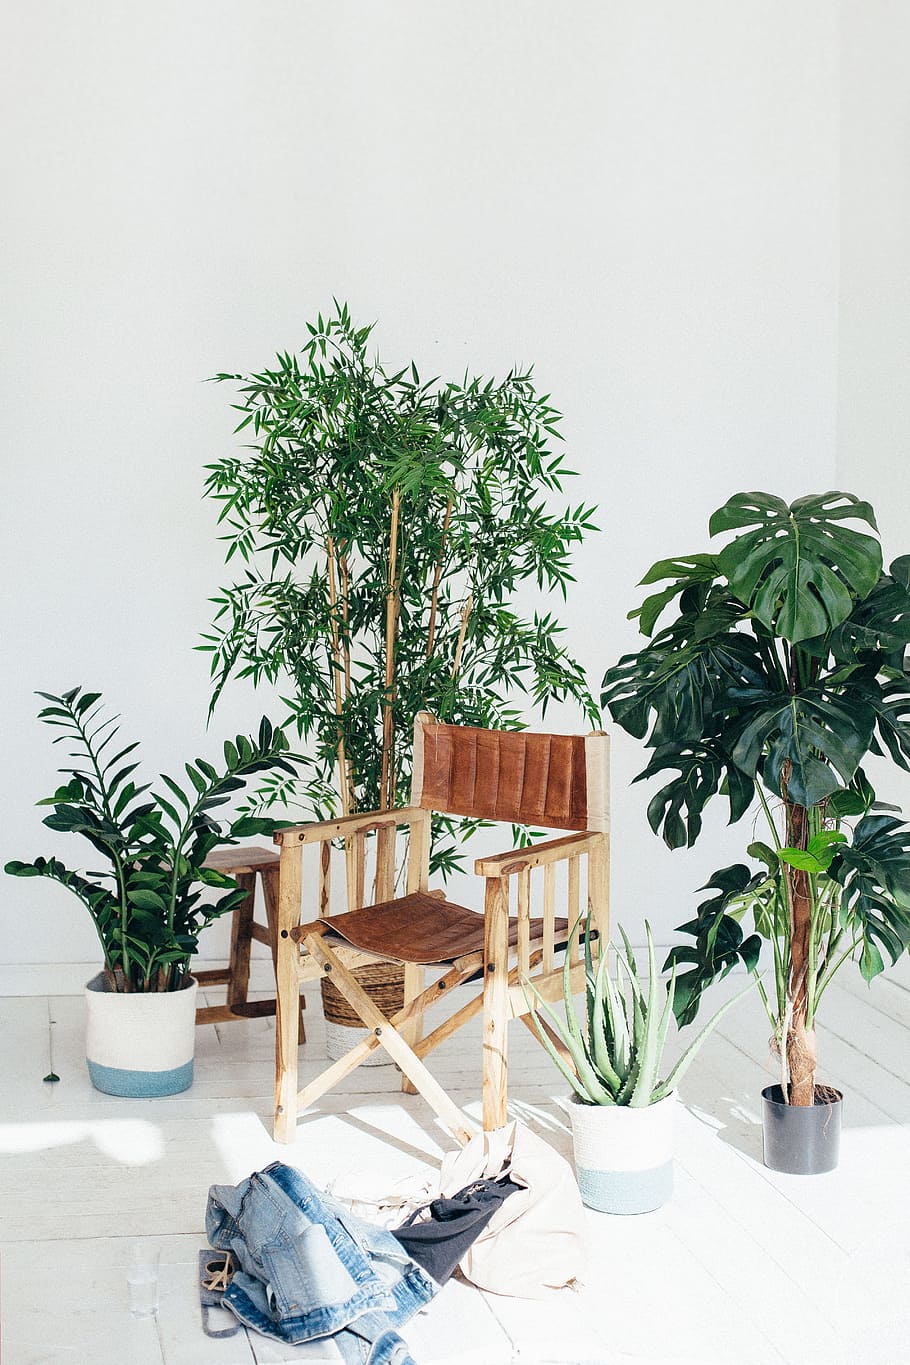 director, chair, plants, inside, internal, house plant, clothes